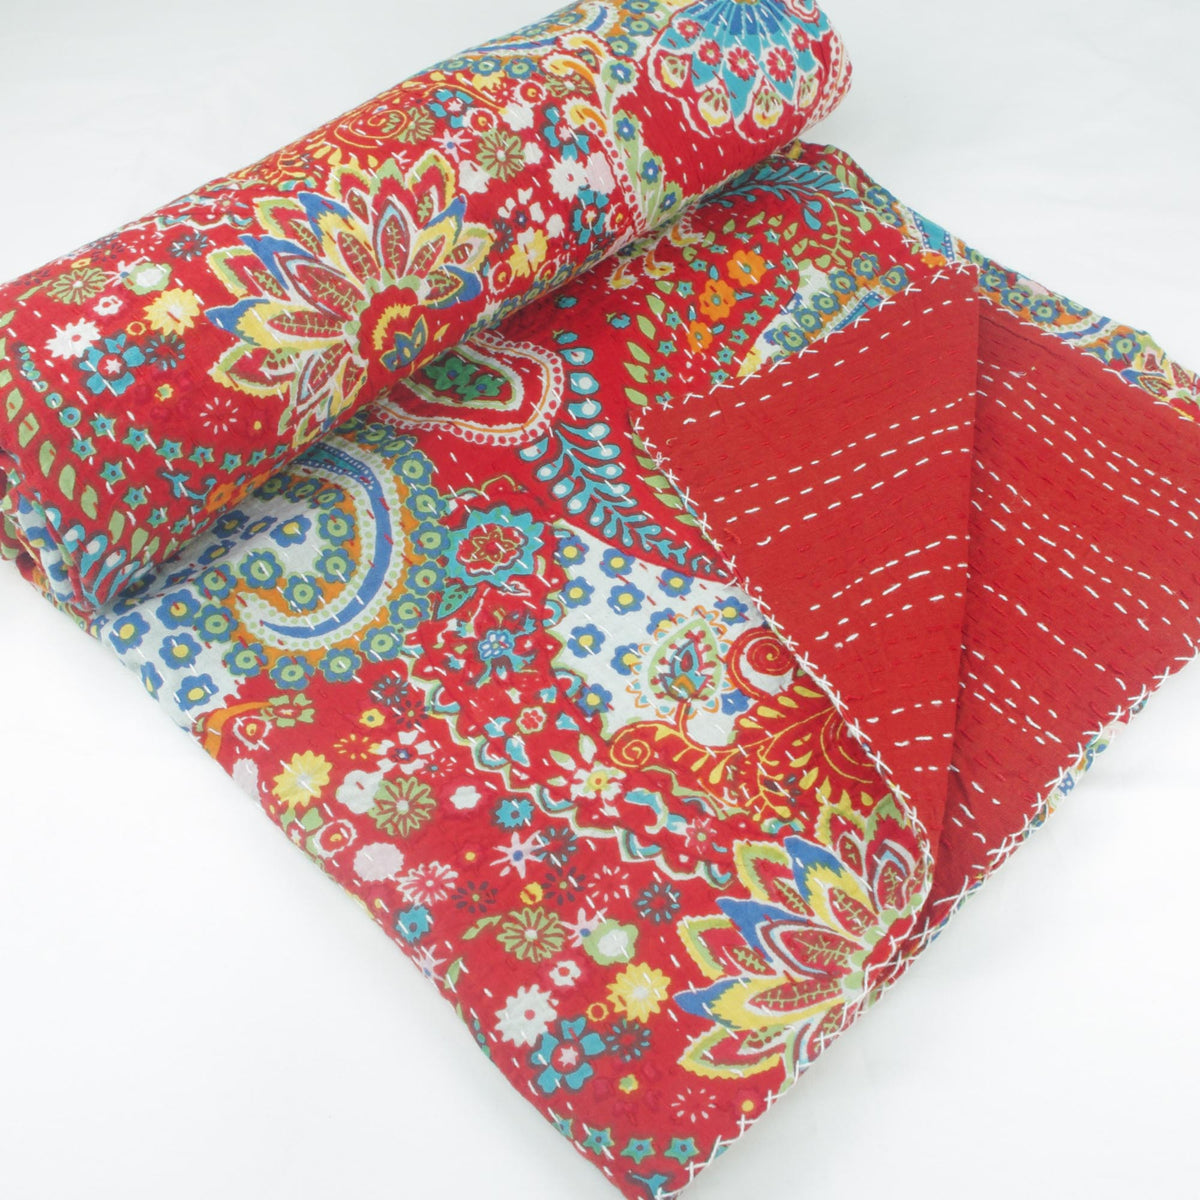 Red Paisley Print Indian Kantha Quilt - Single Bed Size